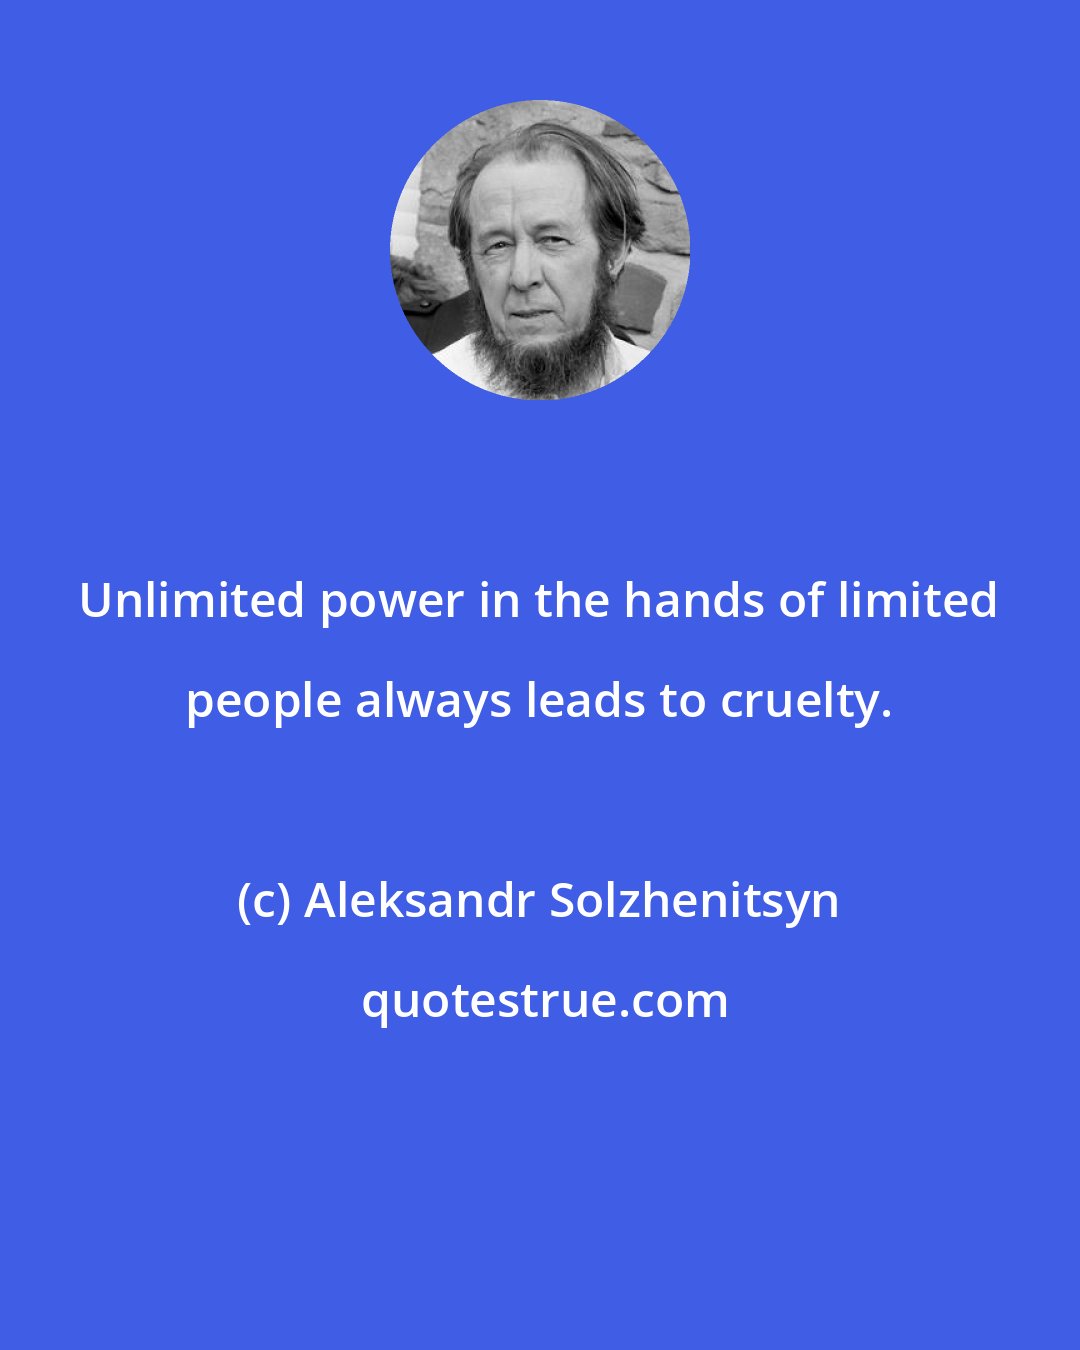 Aleksandr Solzhenitsyn: Unlimited power in the hands of limited people always leads to cruelty.